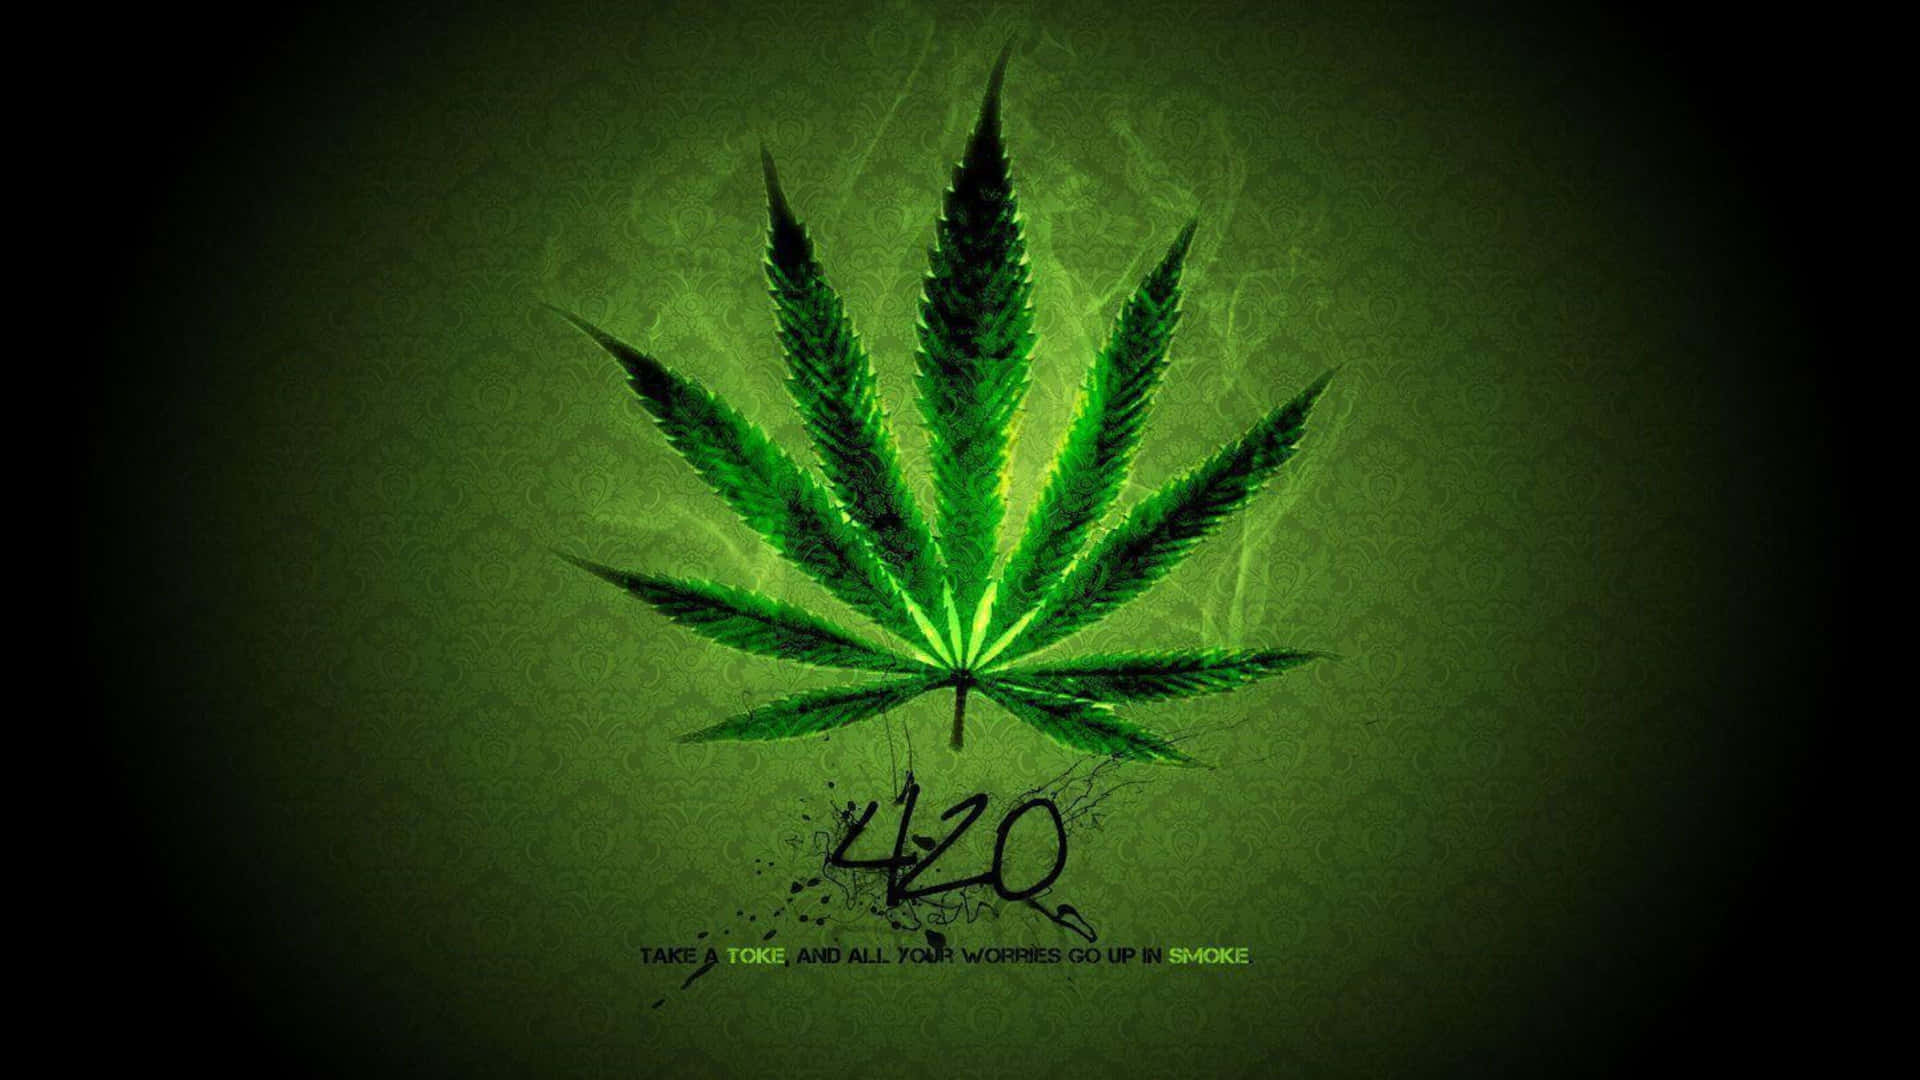 Free Weed Wallpaper Downloads, Weed Wallpaper for FREE